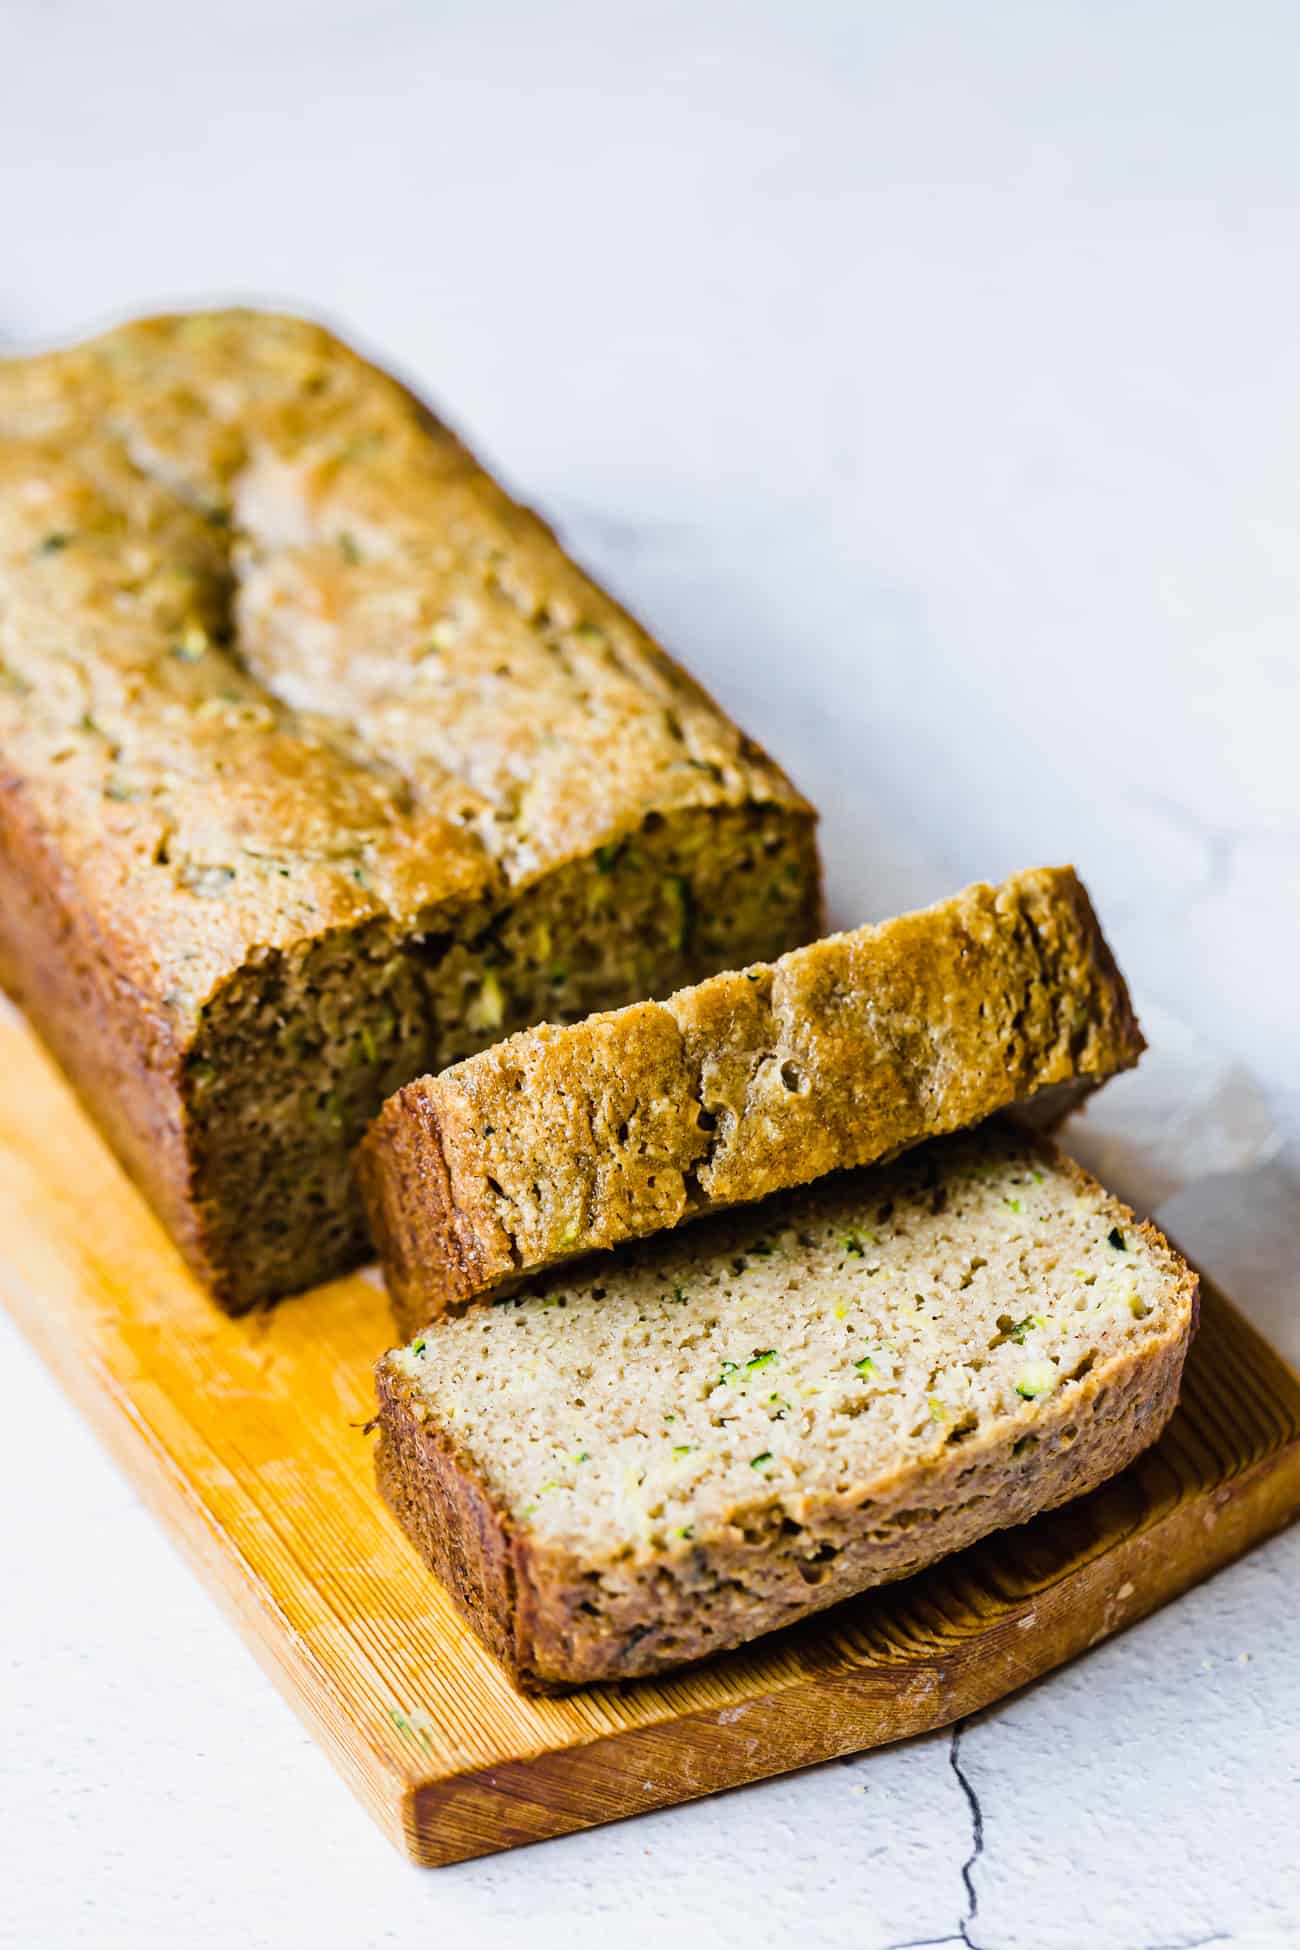 zucchini bread slices on a brown wooden cutting board